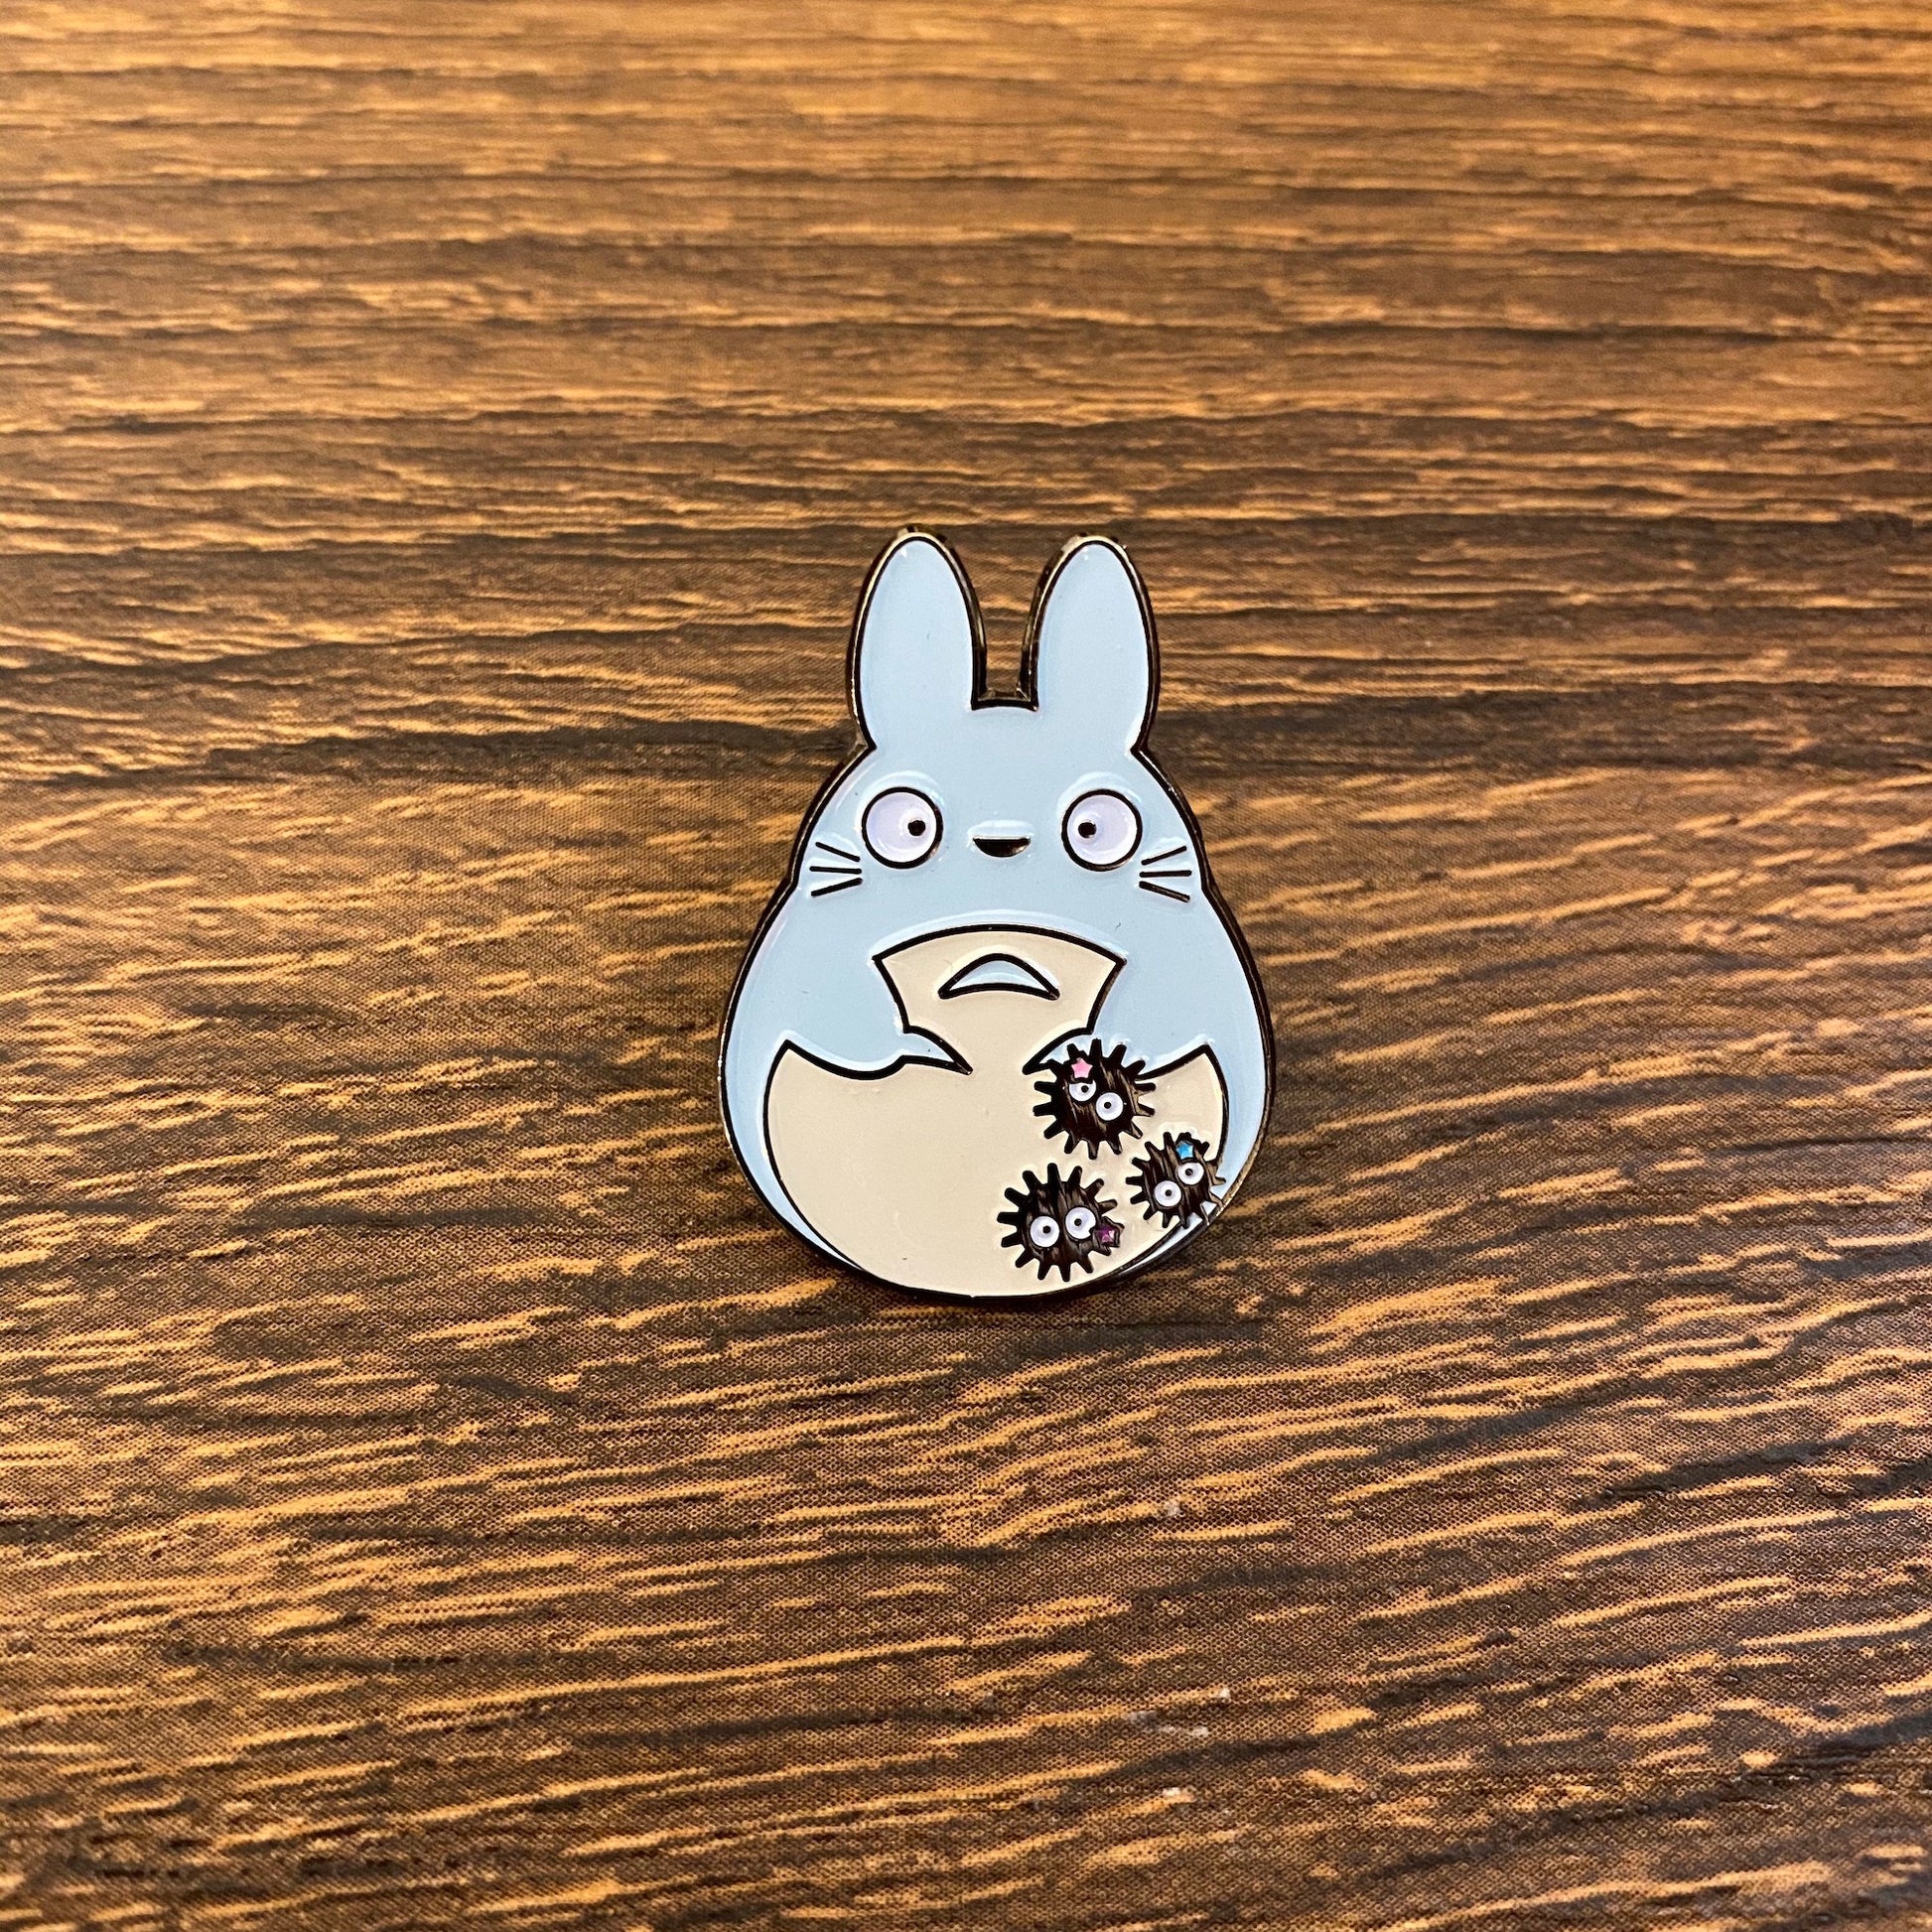 Totoro and his Soot Ball Friends Spirited Away Enamel Pin - thehappypin